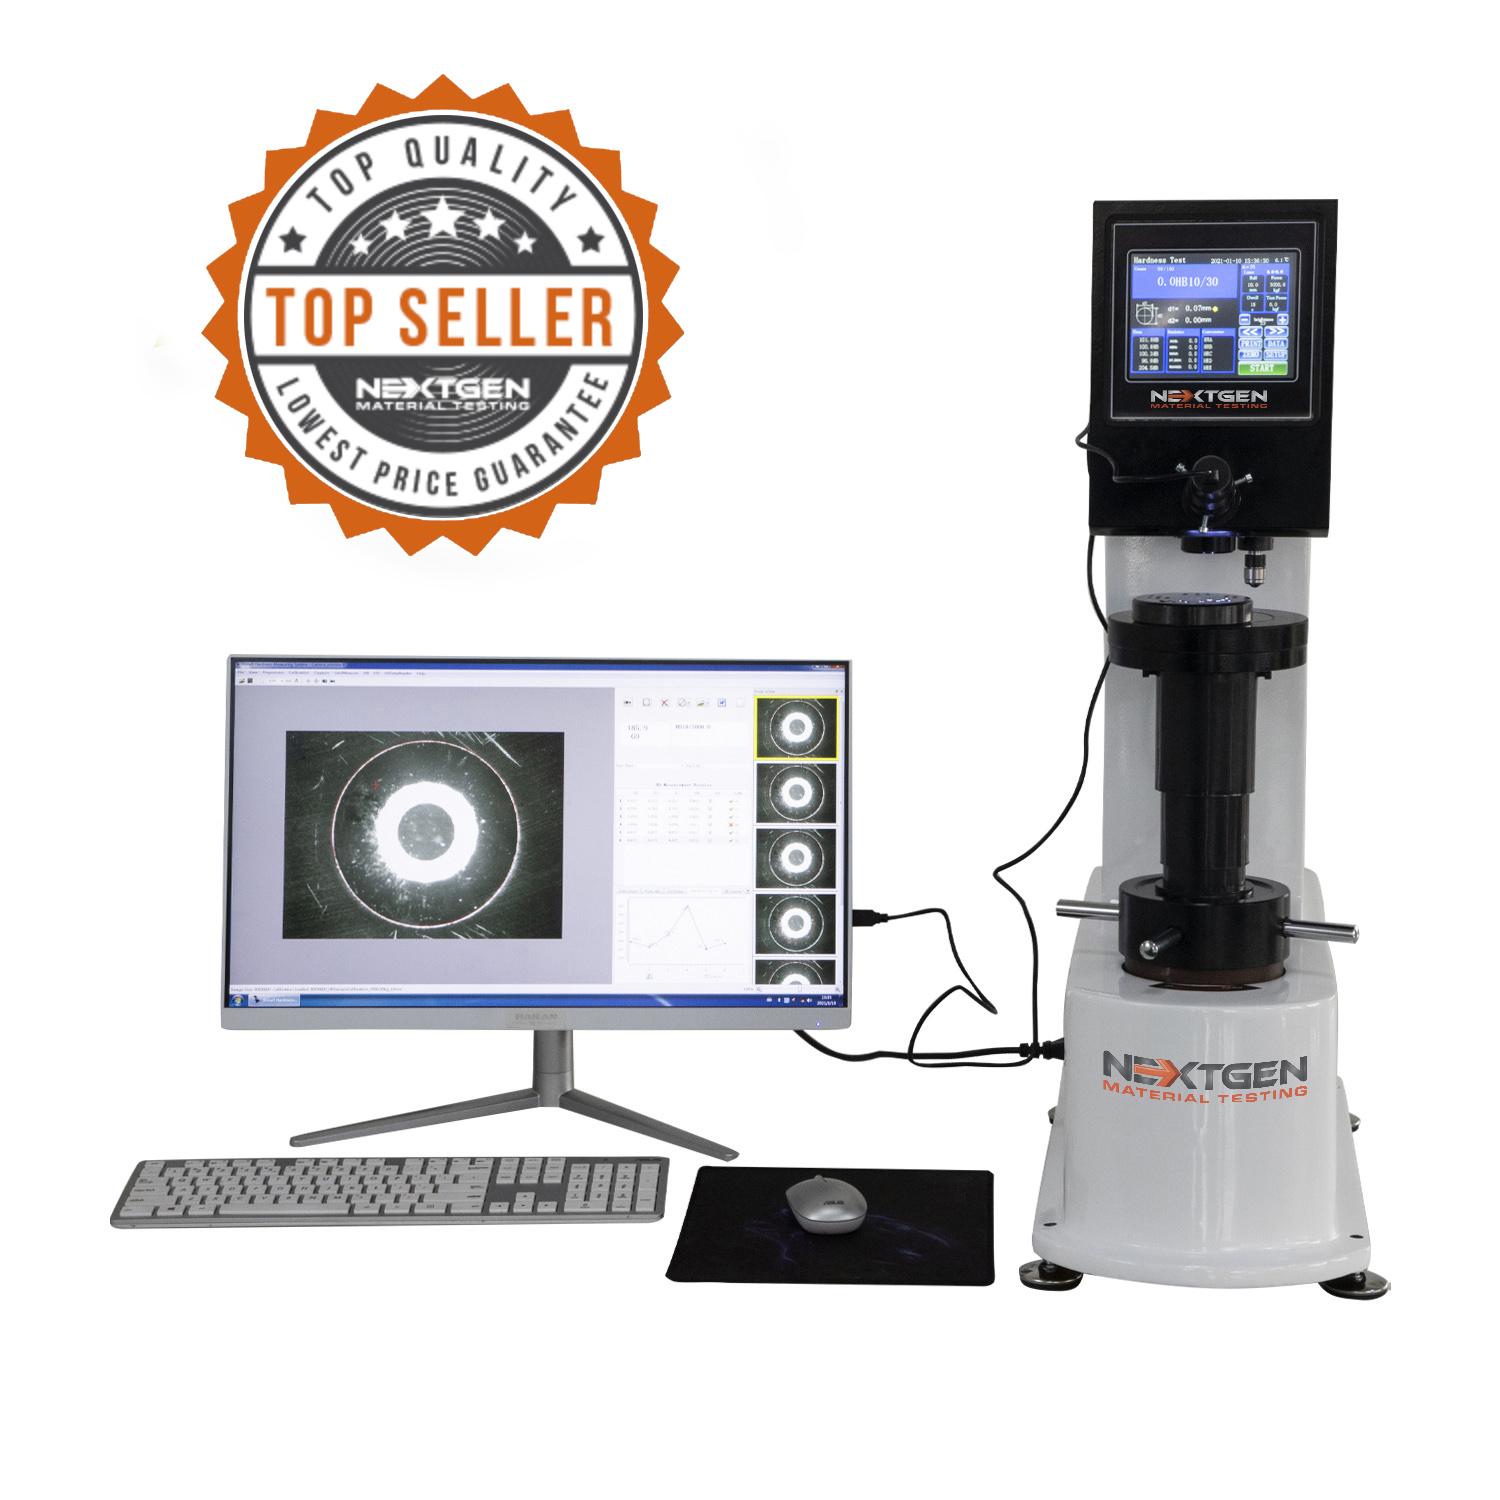 BrinGen - 3000 Series - Digital Brinell and Automatic Brinell Hardness Tester - Closed Loop System